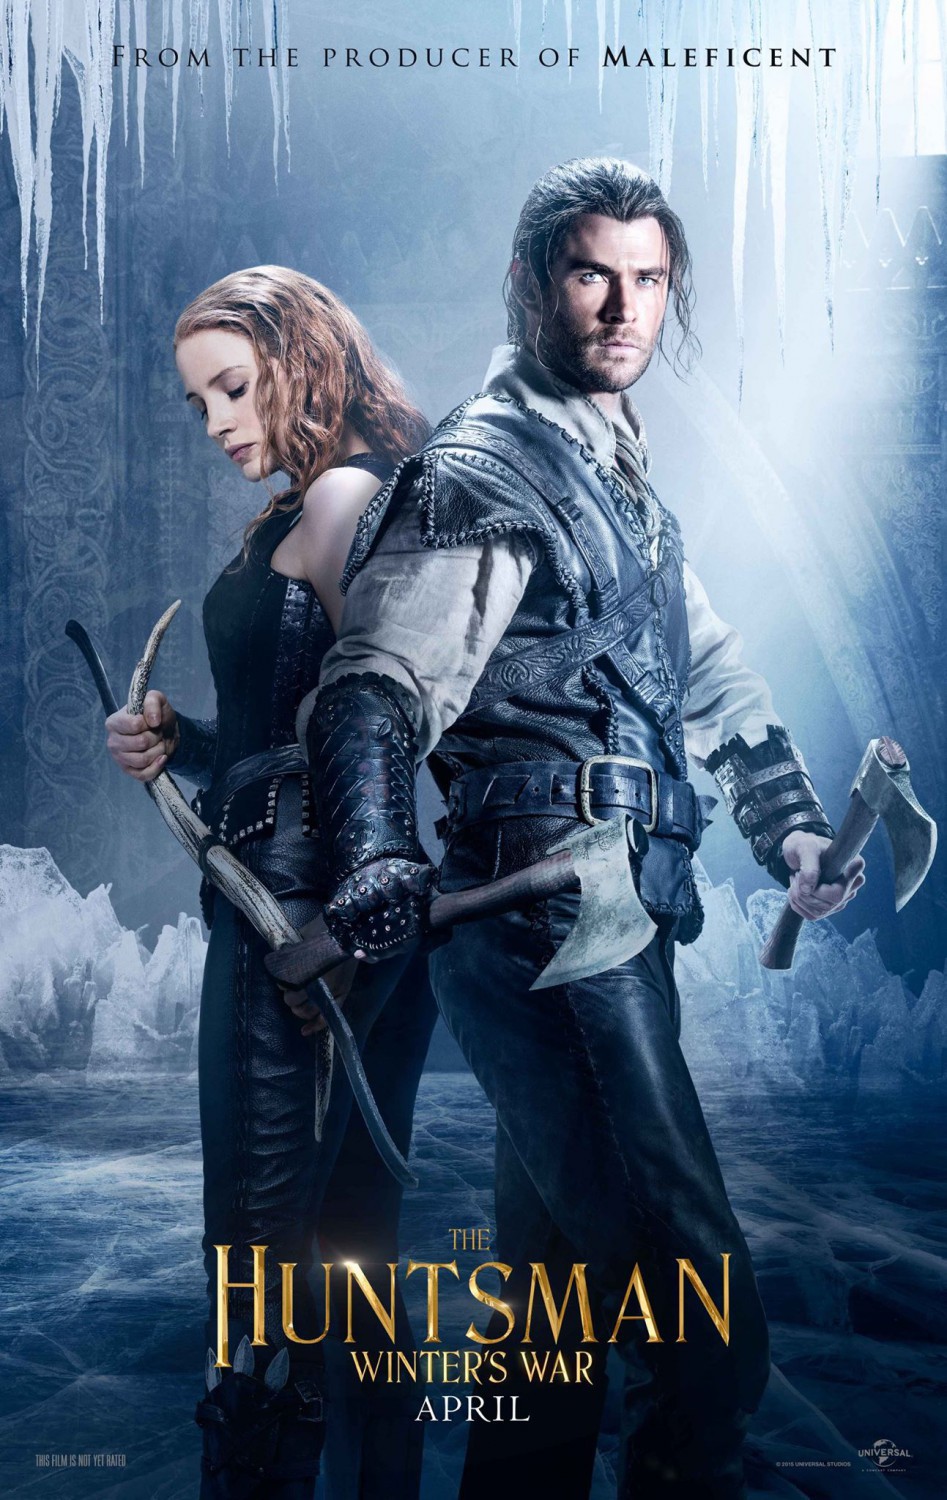 Chris Hemsworth and Jessica Chastain in The Huntsman Winter's War (2016)